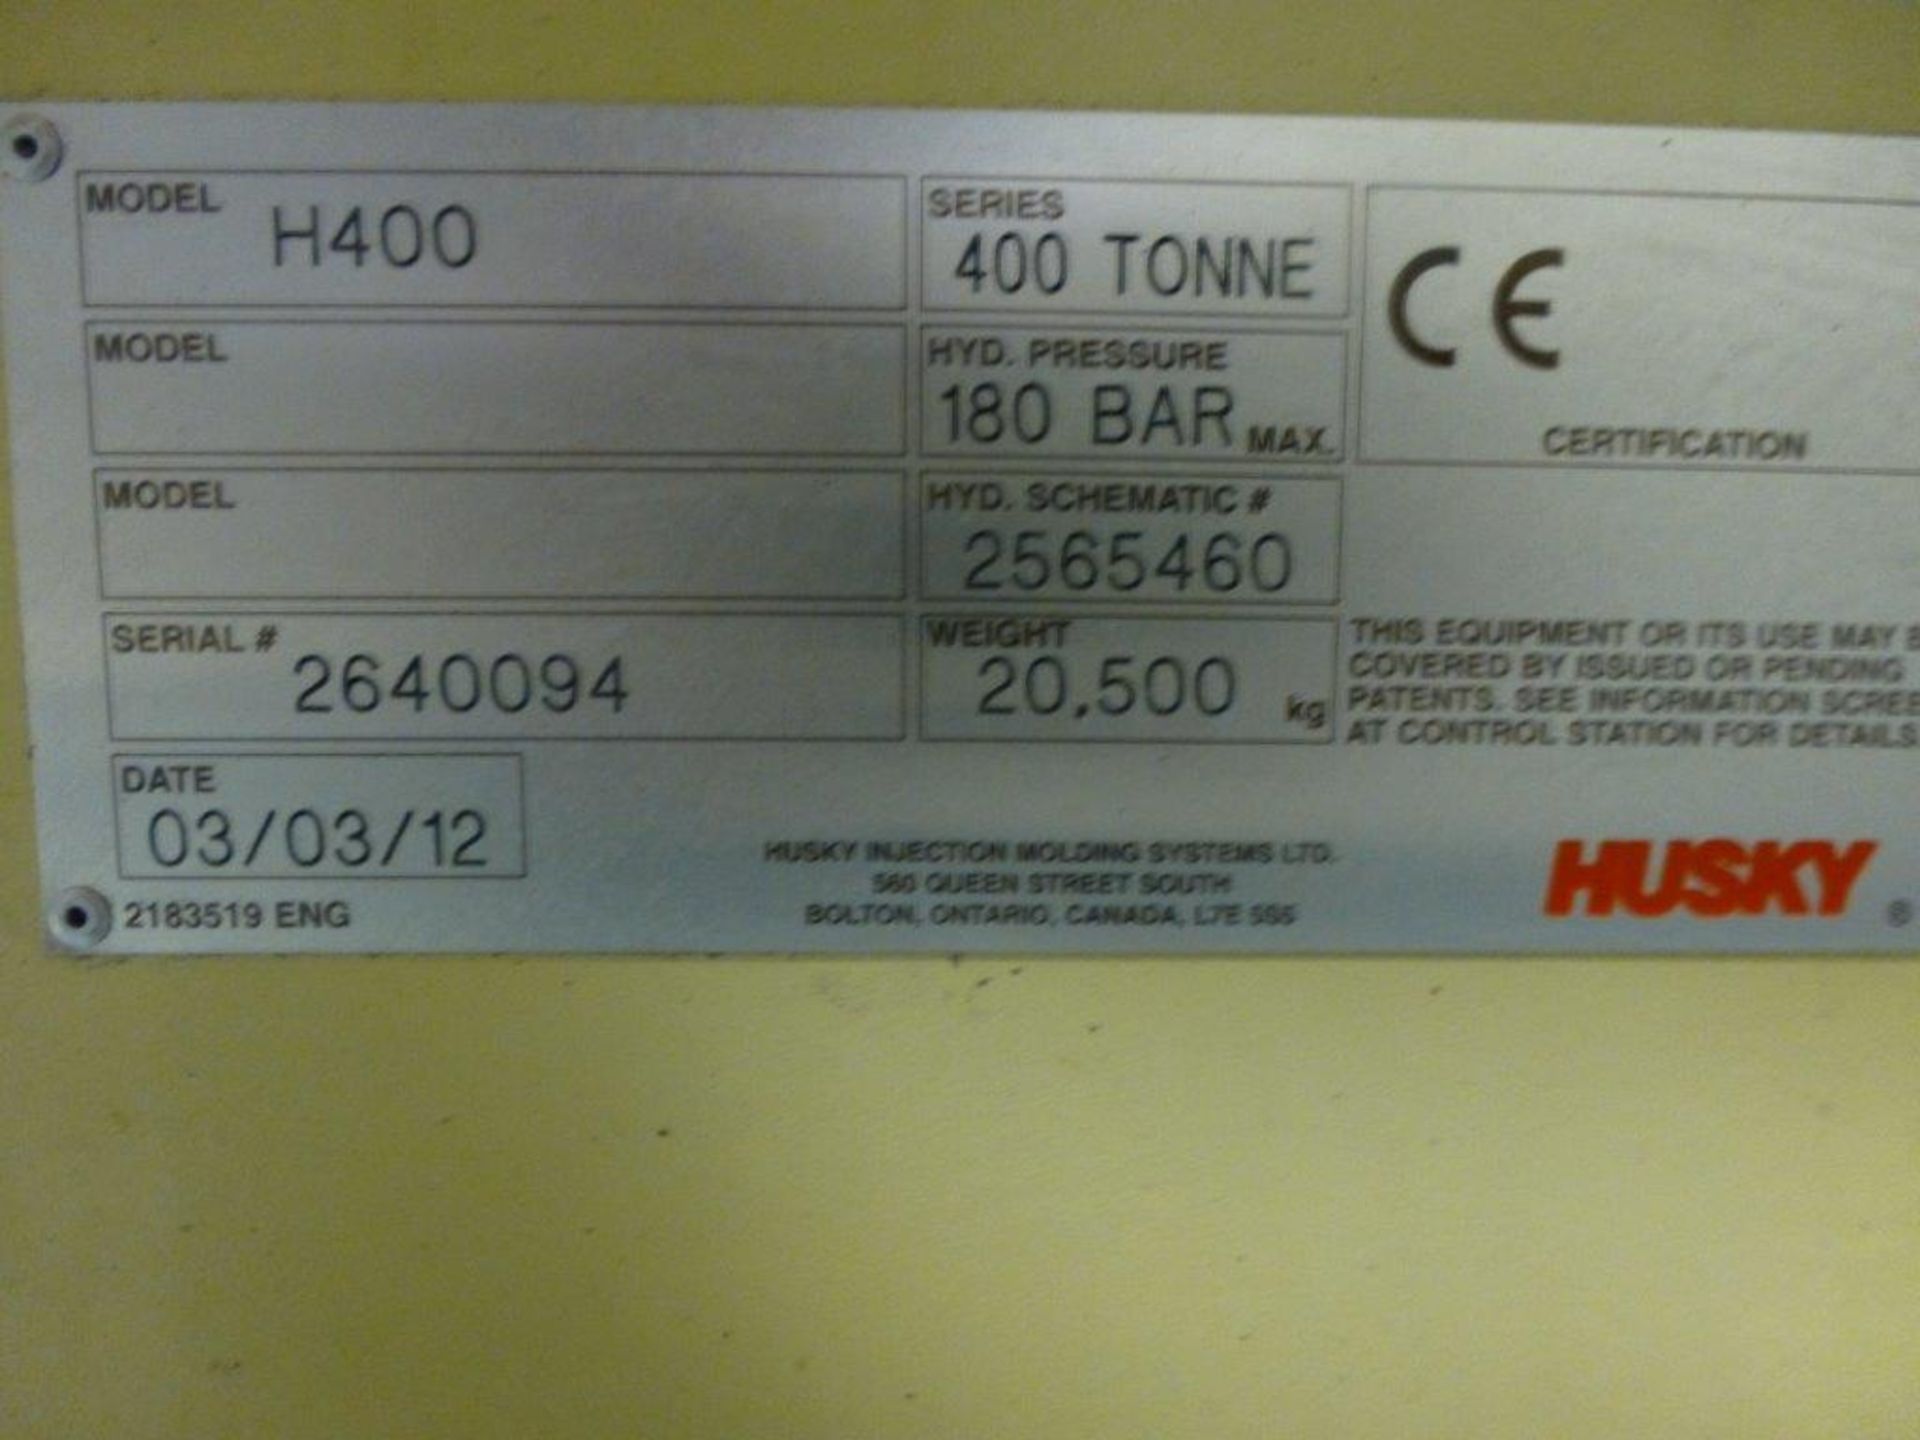 Husky H400 RS115 1200 CNC plastic injection moulding machine Serial No. 2640094 (2003) with 400 - Image 6 of 6